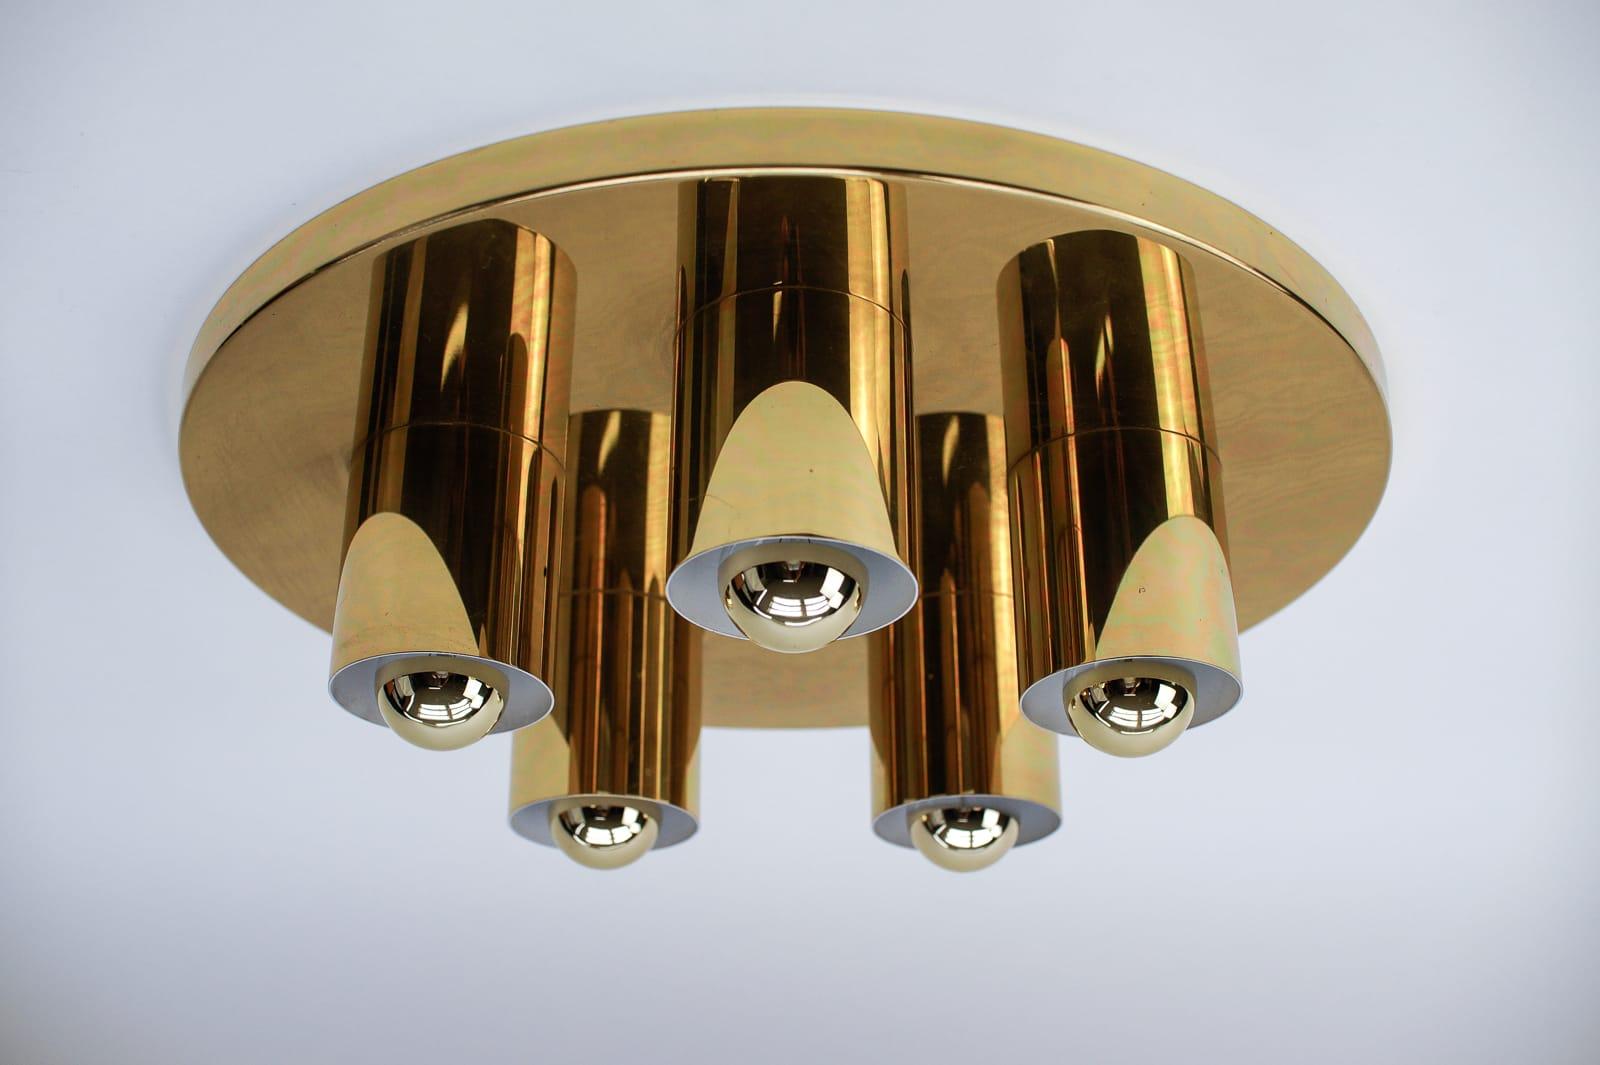 Hollywood Regency Mid-Century Modern Flush Mount by Beisl Leuchte, 1960s Germany For Sale